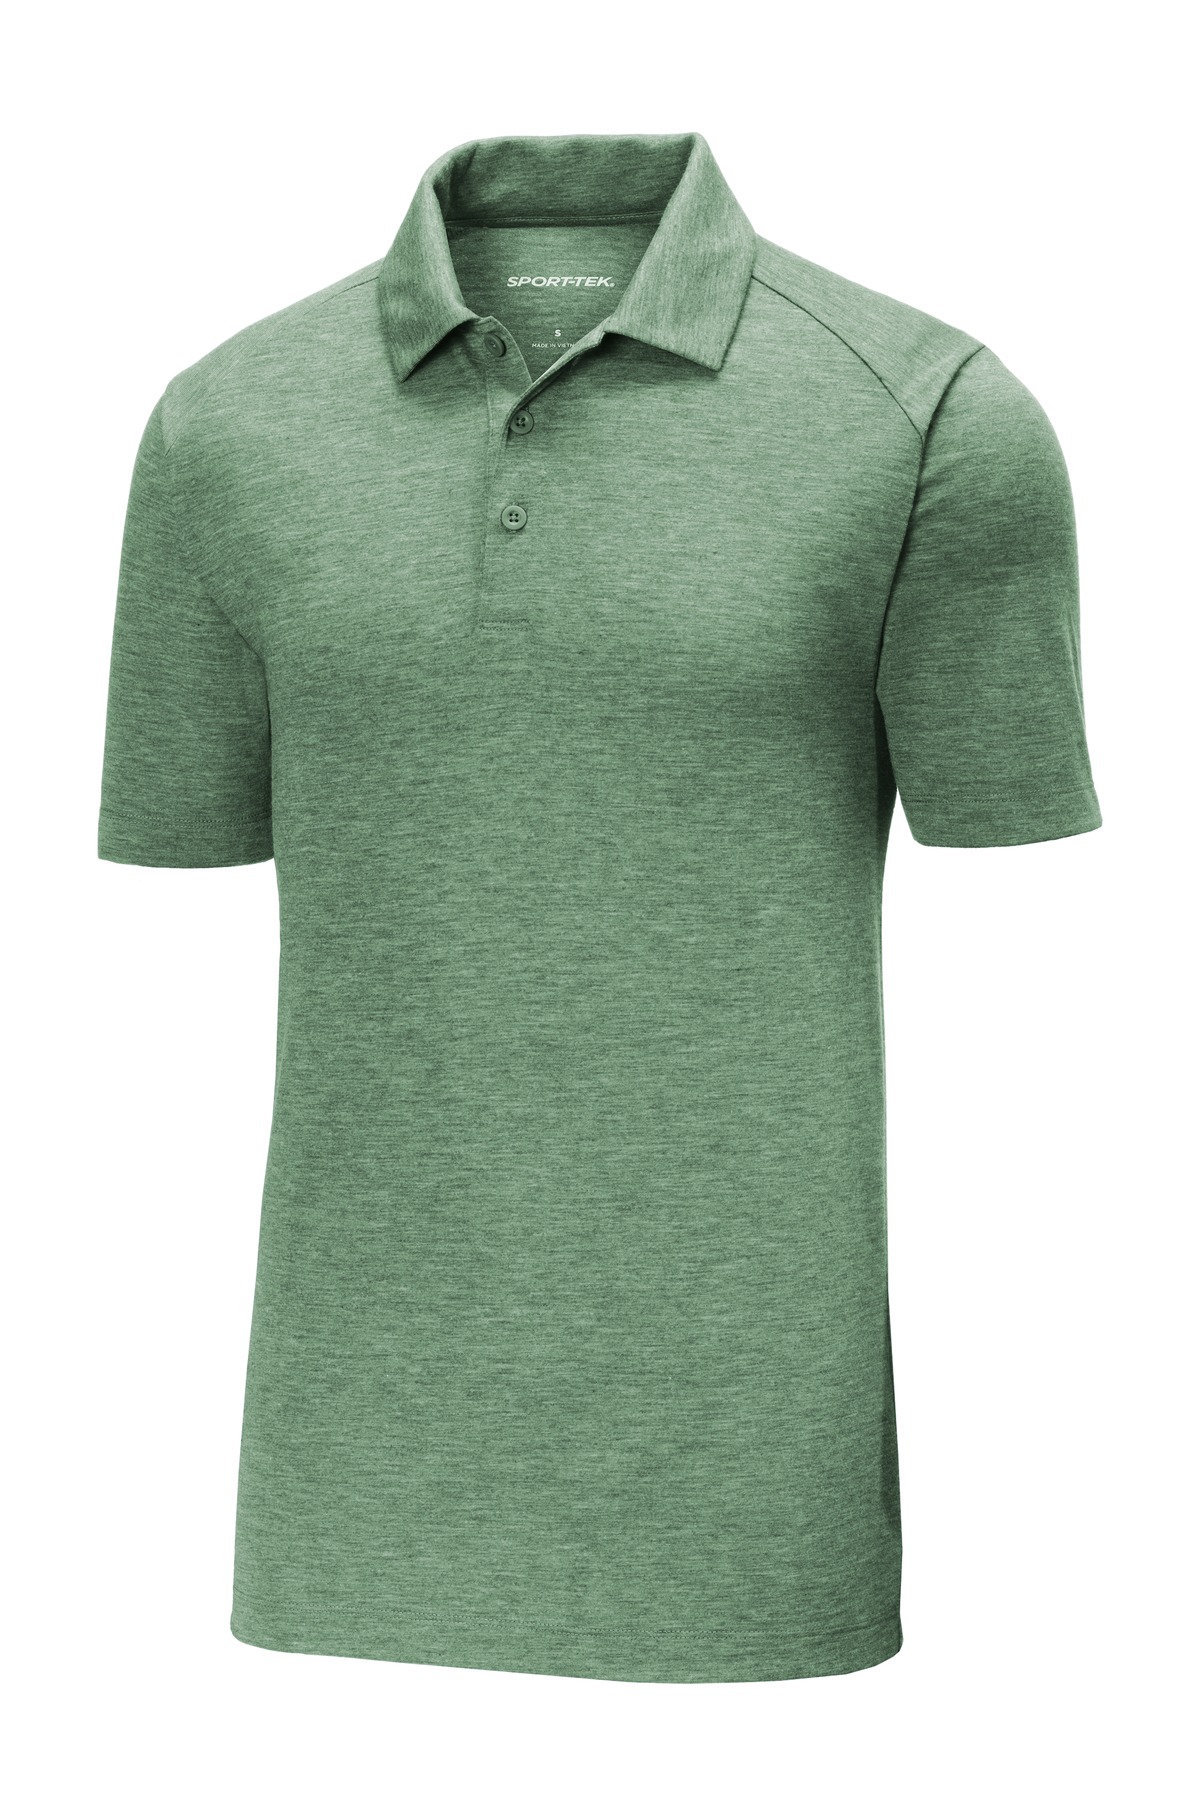 PosiCharge  Tri-Blend Wicking Polo - ST405